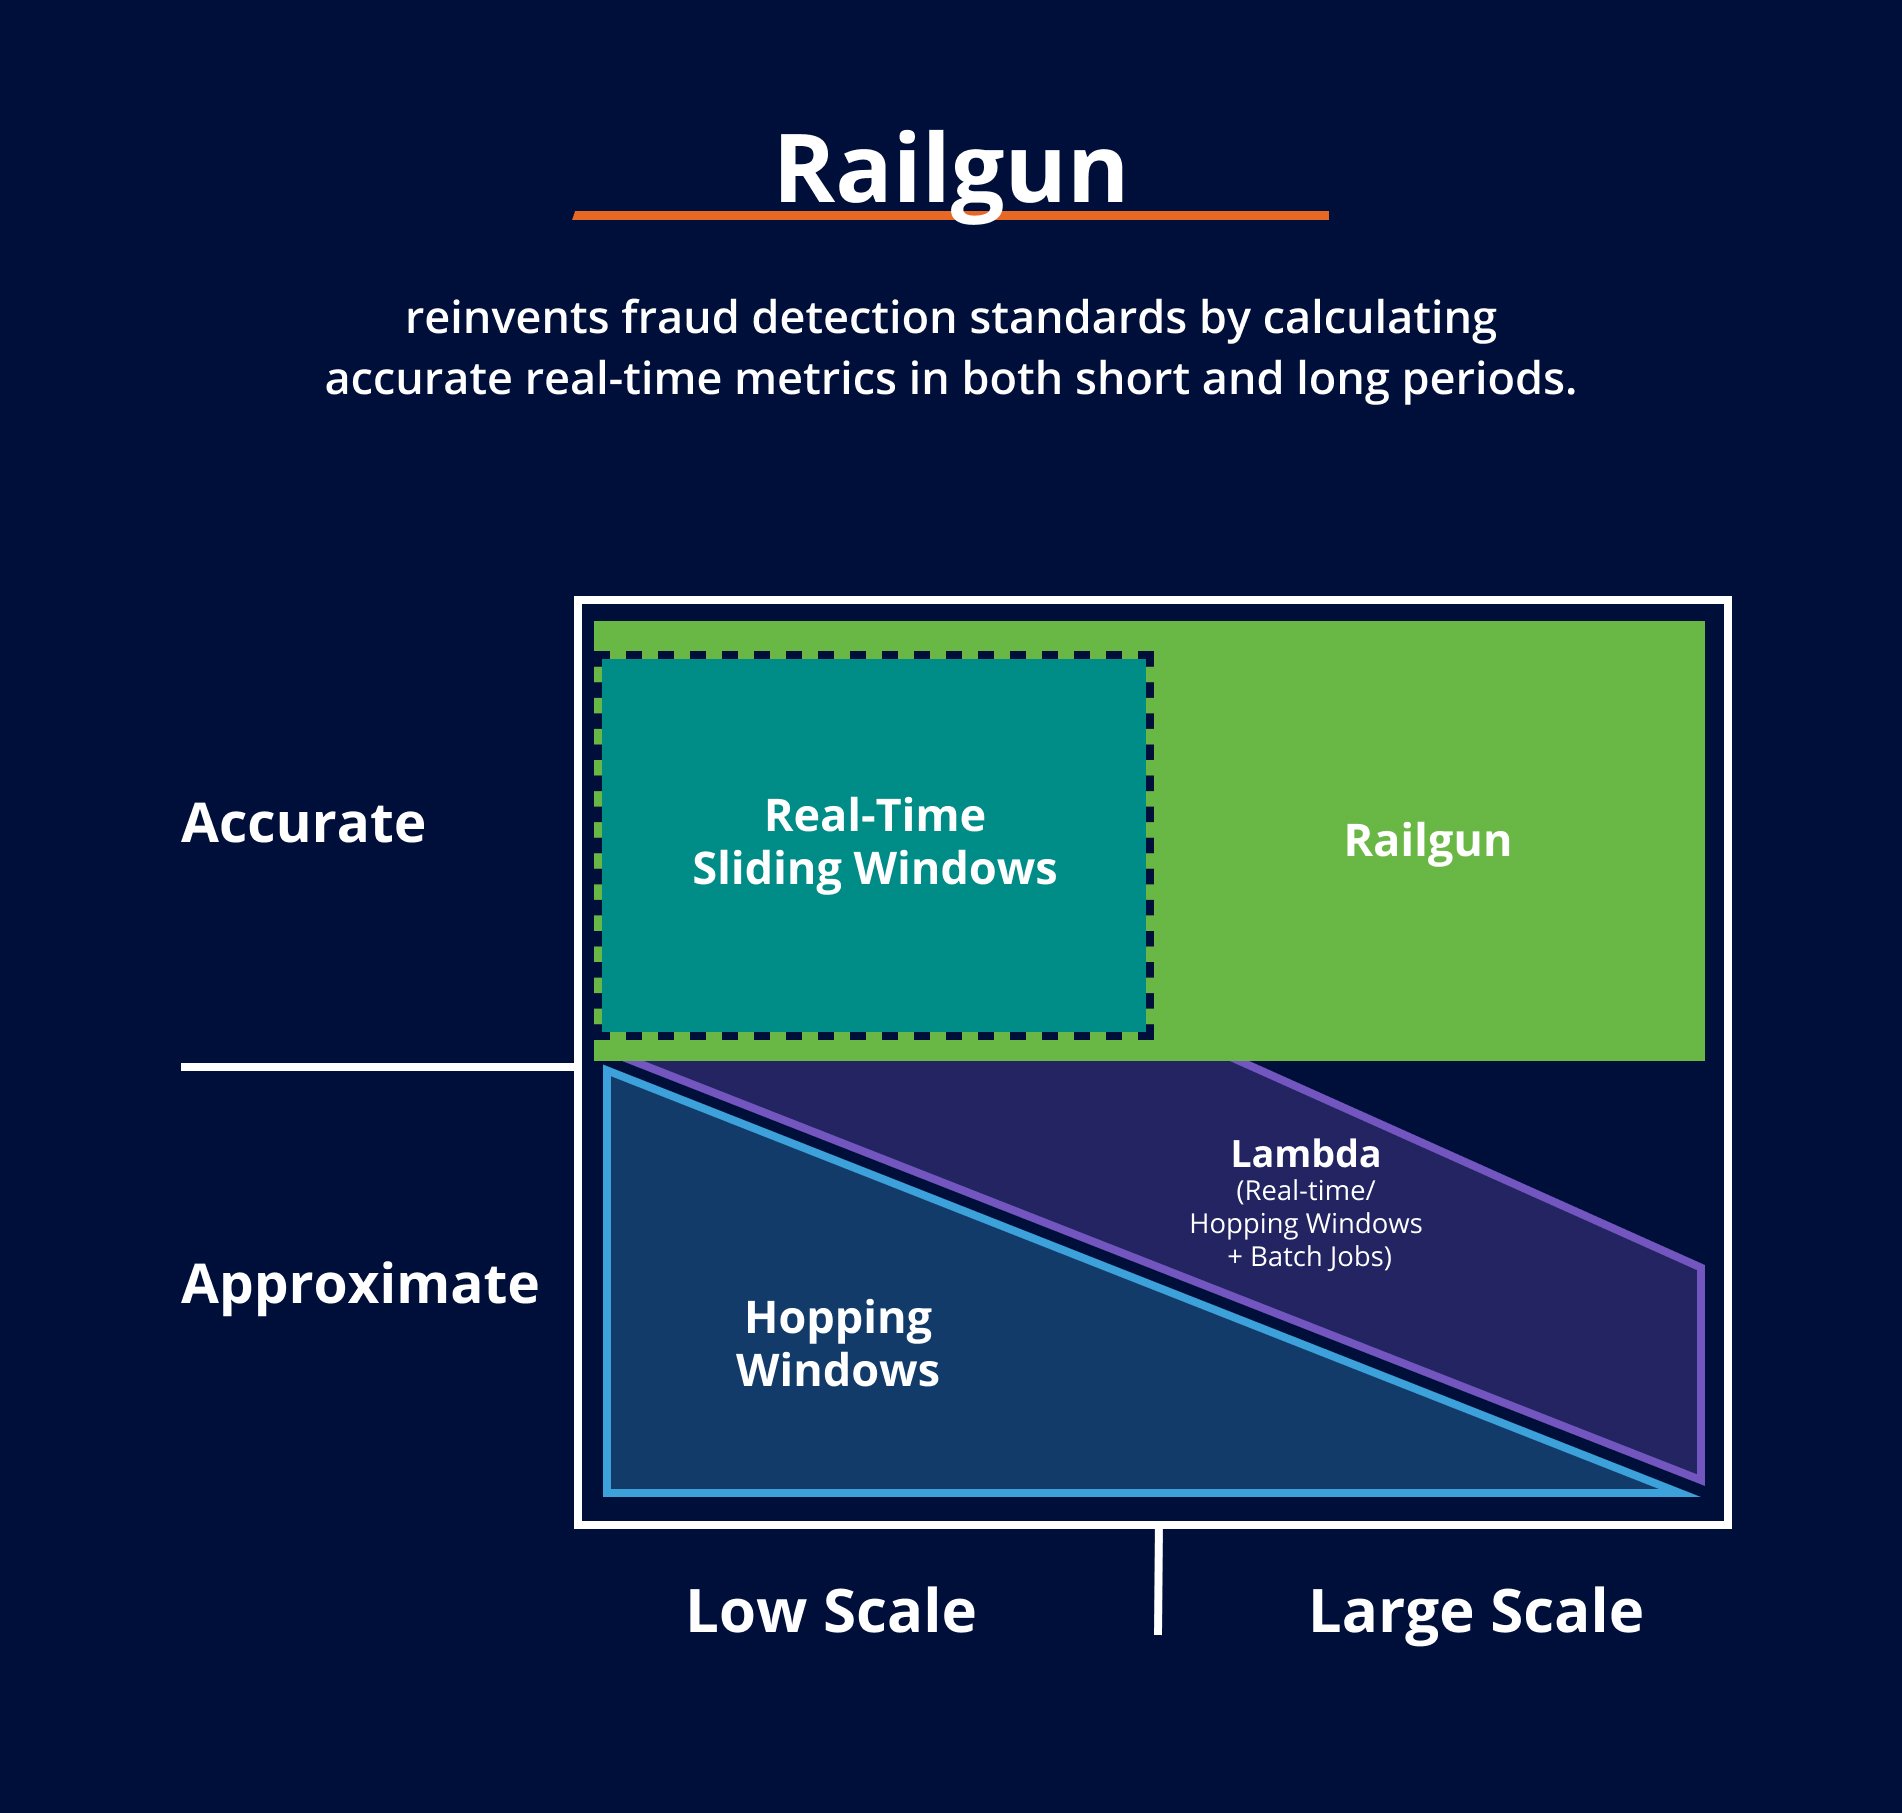 Diagram explaining how Feedzai's Railgun reinvents fraud detection by both calculating accurate real-time metrics in both short and long periods.